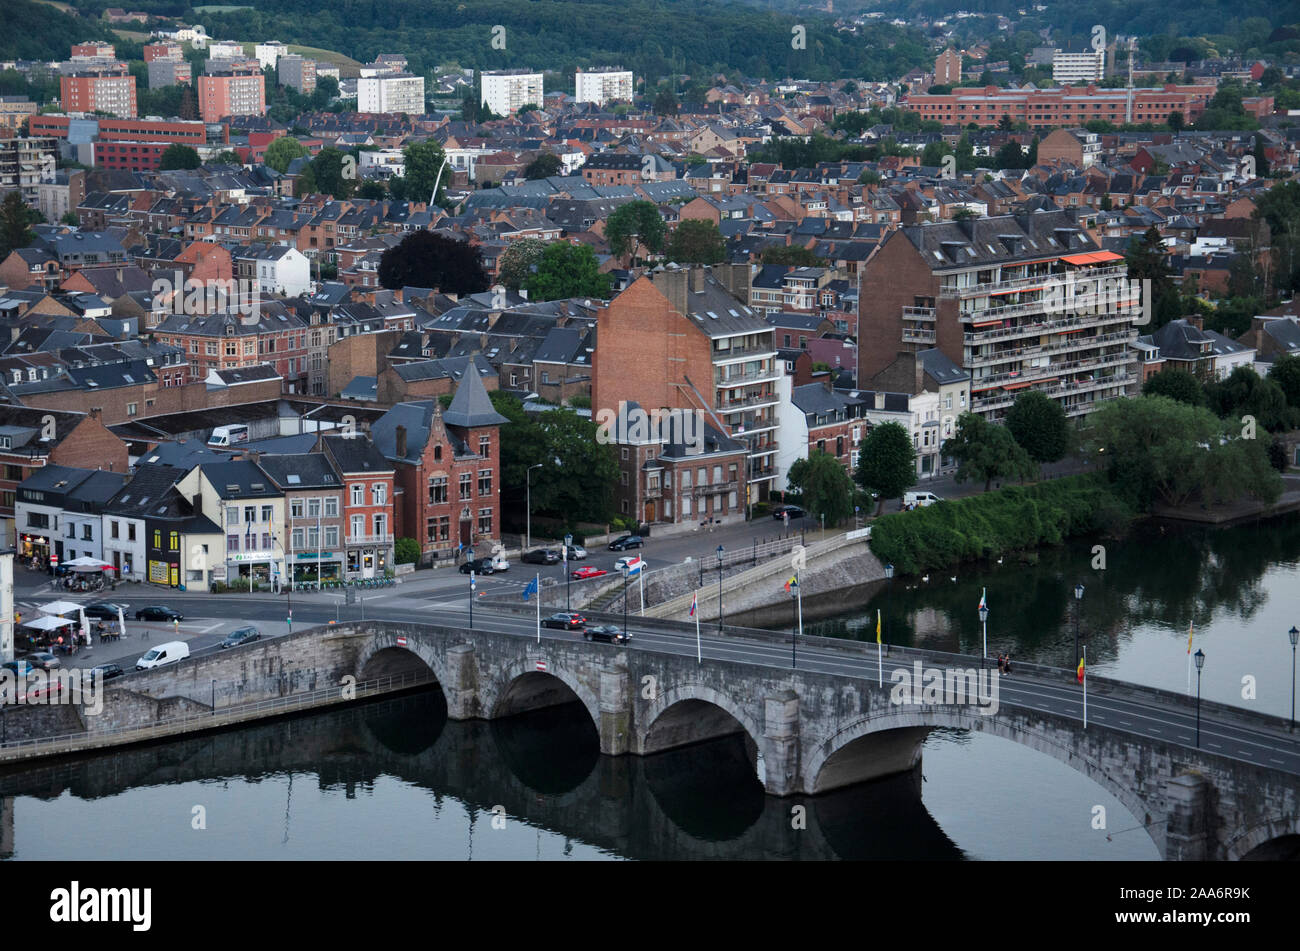 Aerial view of the city and Meuse river, Namur, Belgium, Europe Stock Photo